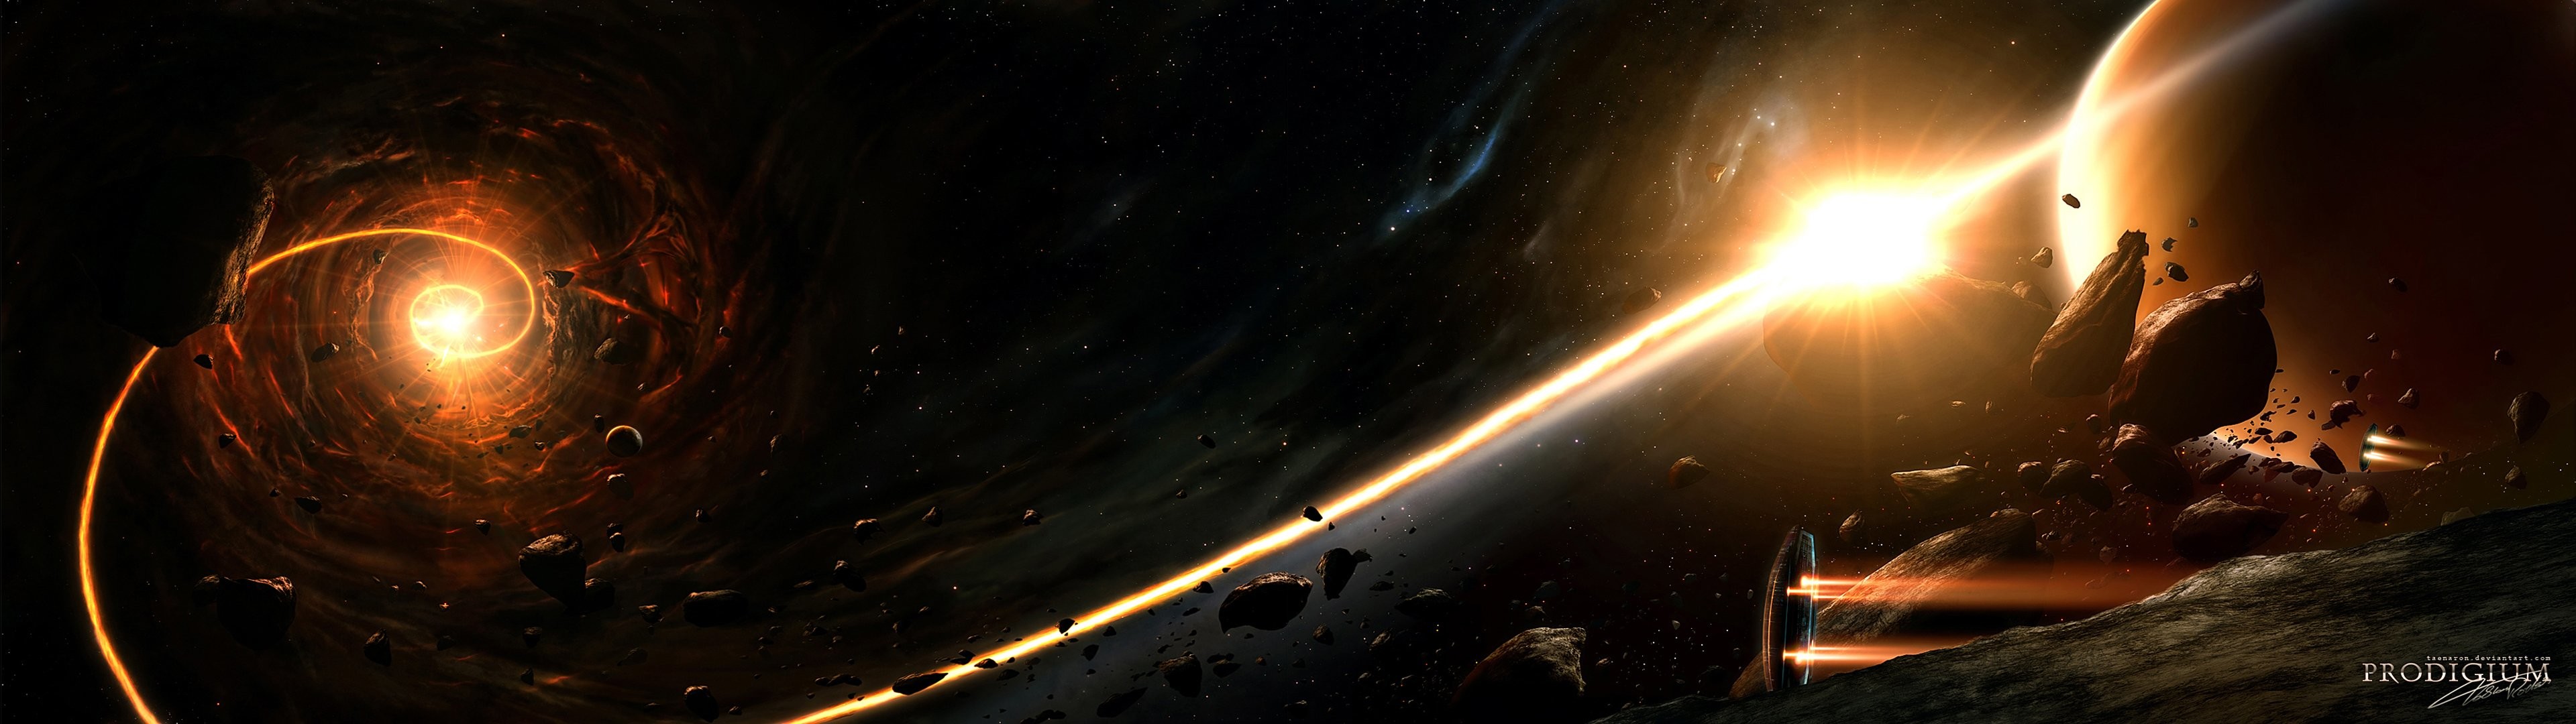 3840x1080 Sunrise outer space planets wallpaper |  | 329246 | WallpaperUP